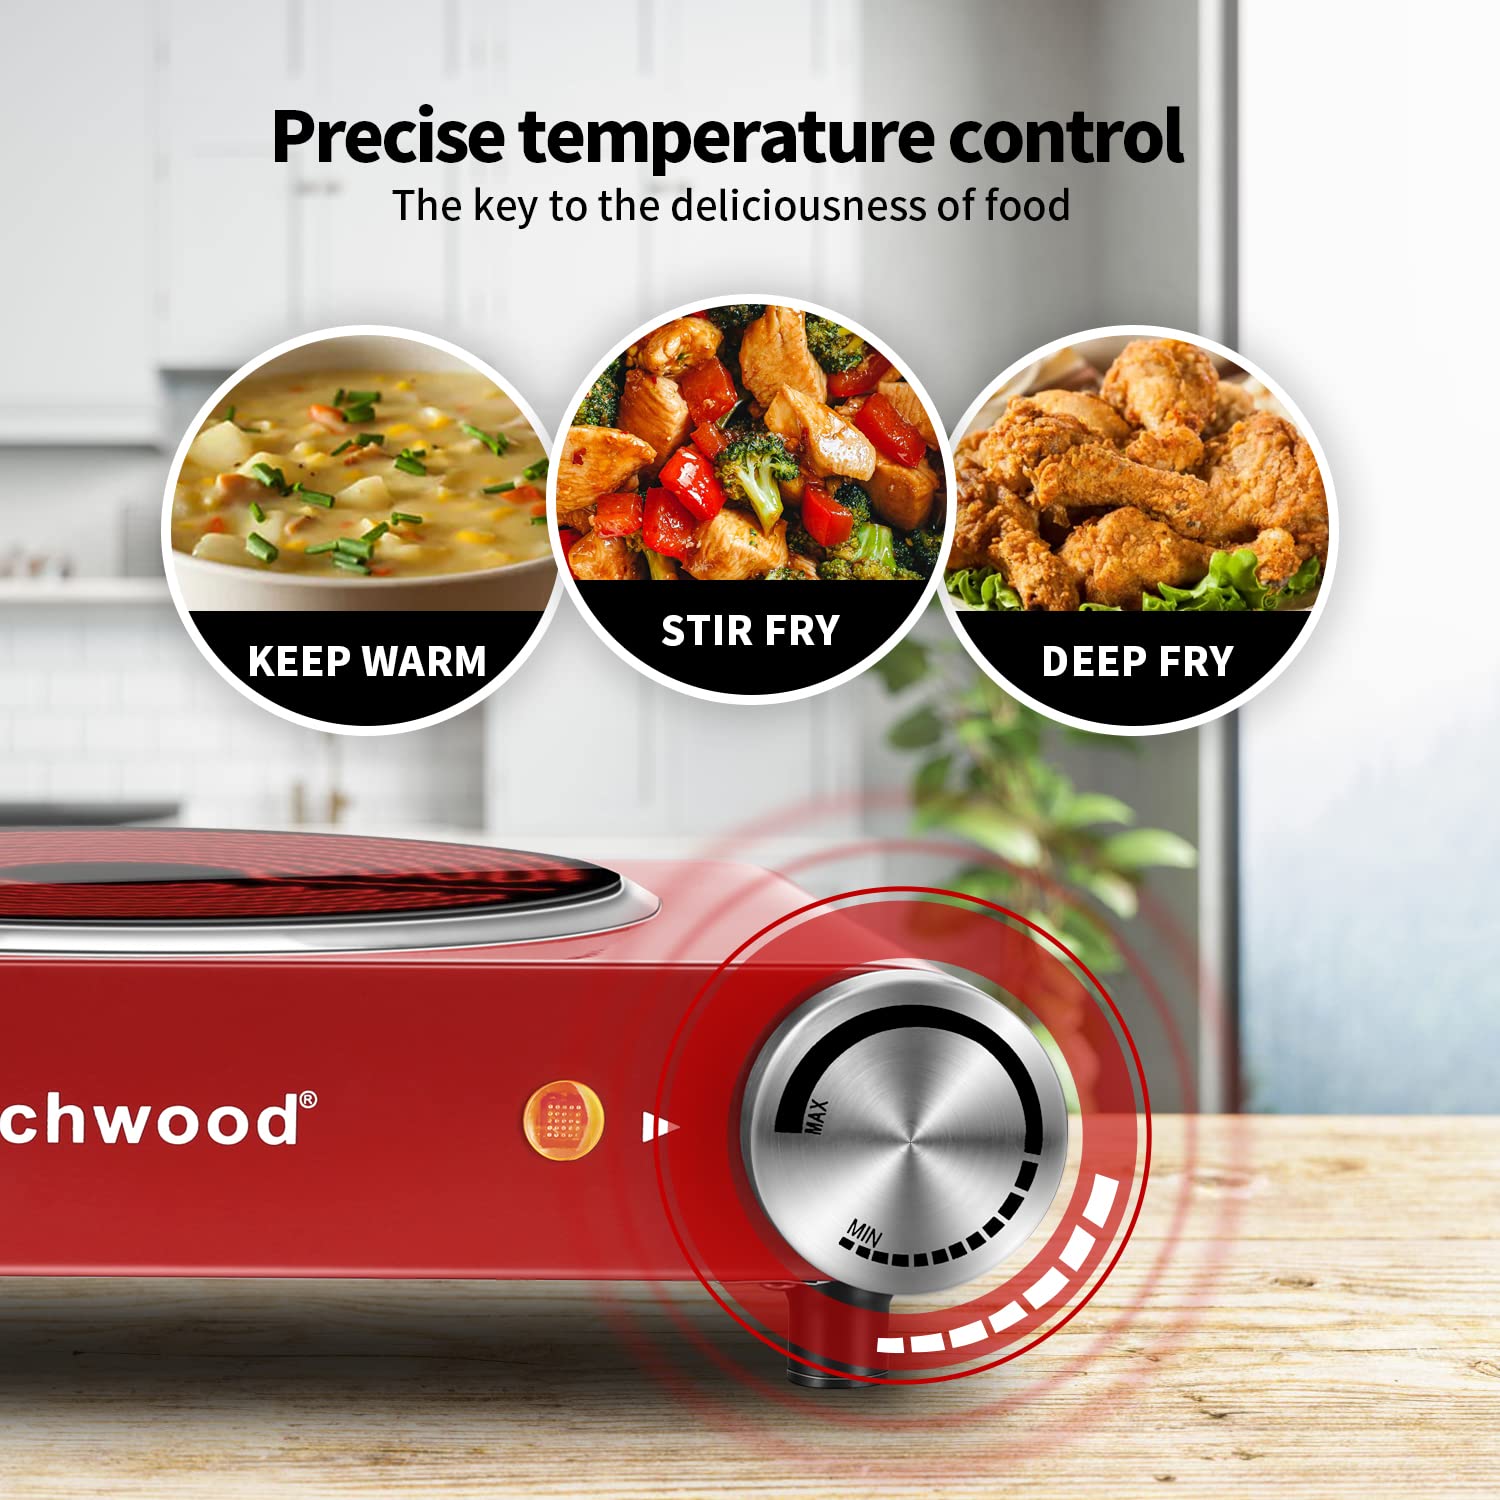 Electric Single Stovetop Hot Plate for Cooking 1500W 7.3/4 Glass Cast Iron Portable Stove Burners Cool Touch Handle Cooktop Keeps Food Warm